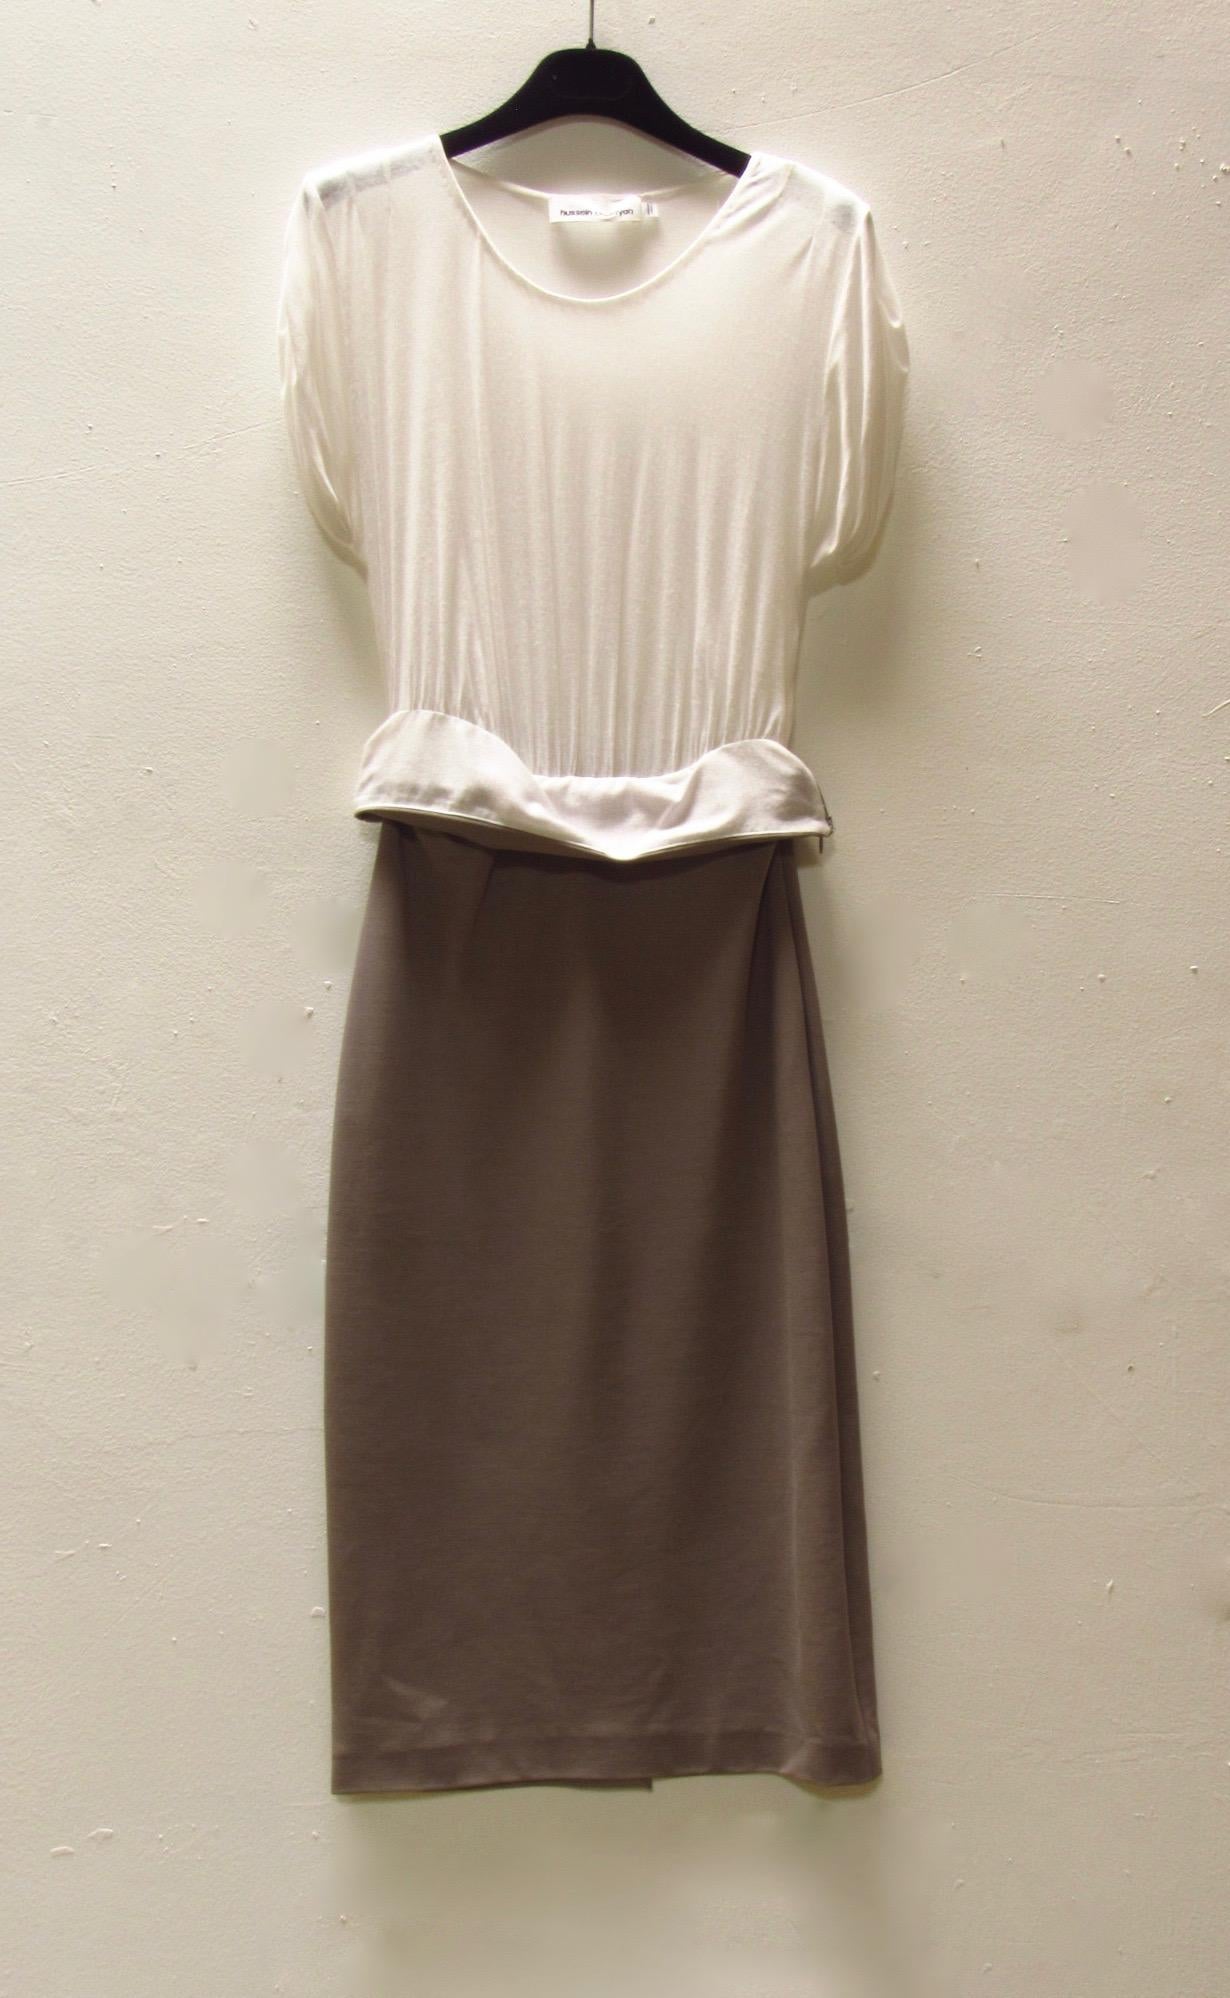 Two-tone dress by Hussein Chalayan. This dress has a lightweight white modal-blend top with a scoop neck and cuffed short sleeves. It is tucked into a body-hugging pencil skirt in a taupe rayon blend knit. The skirt sits below the knee and has a